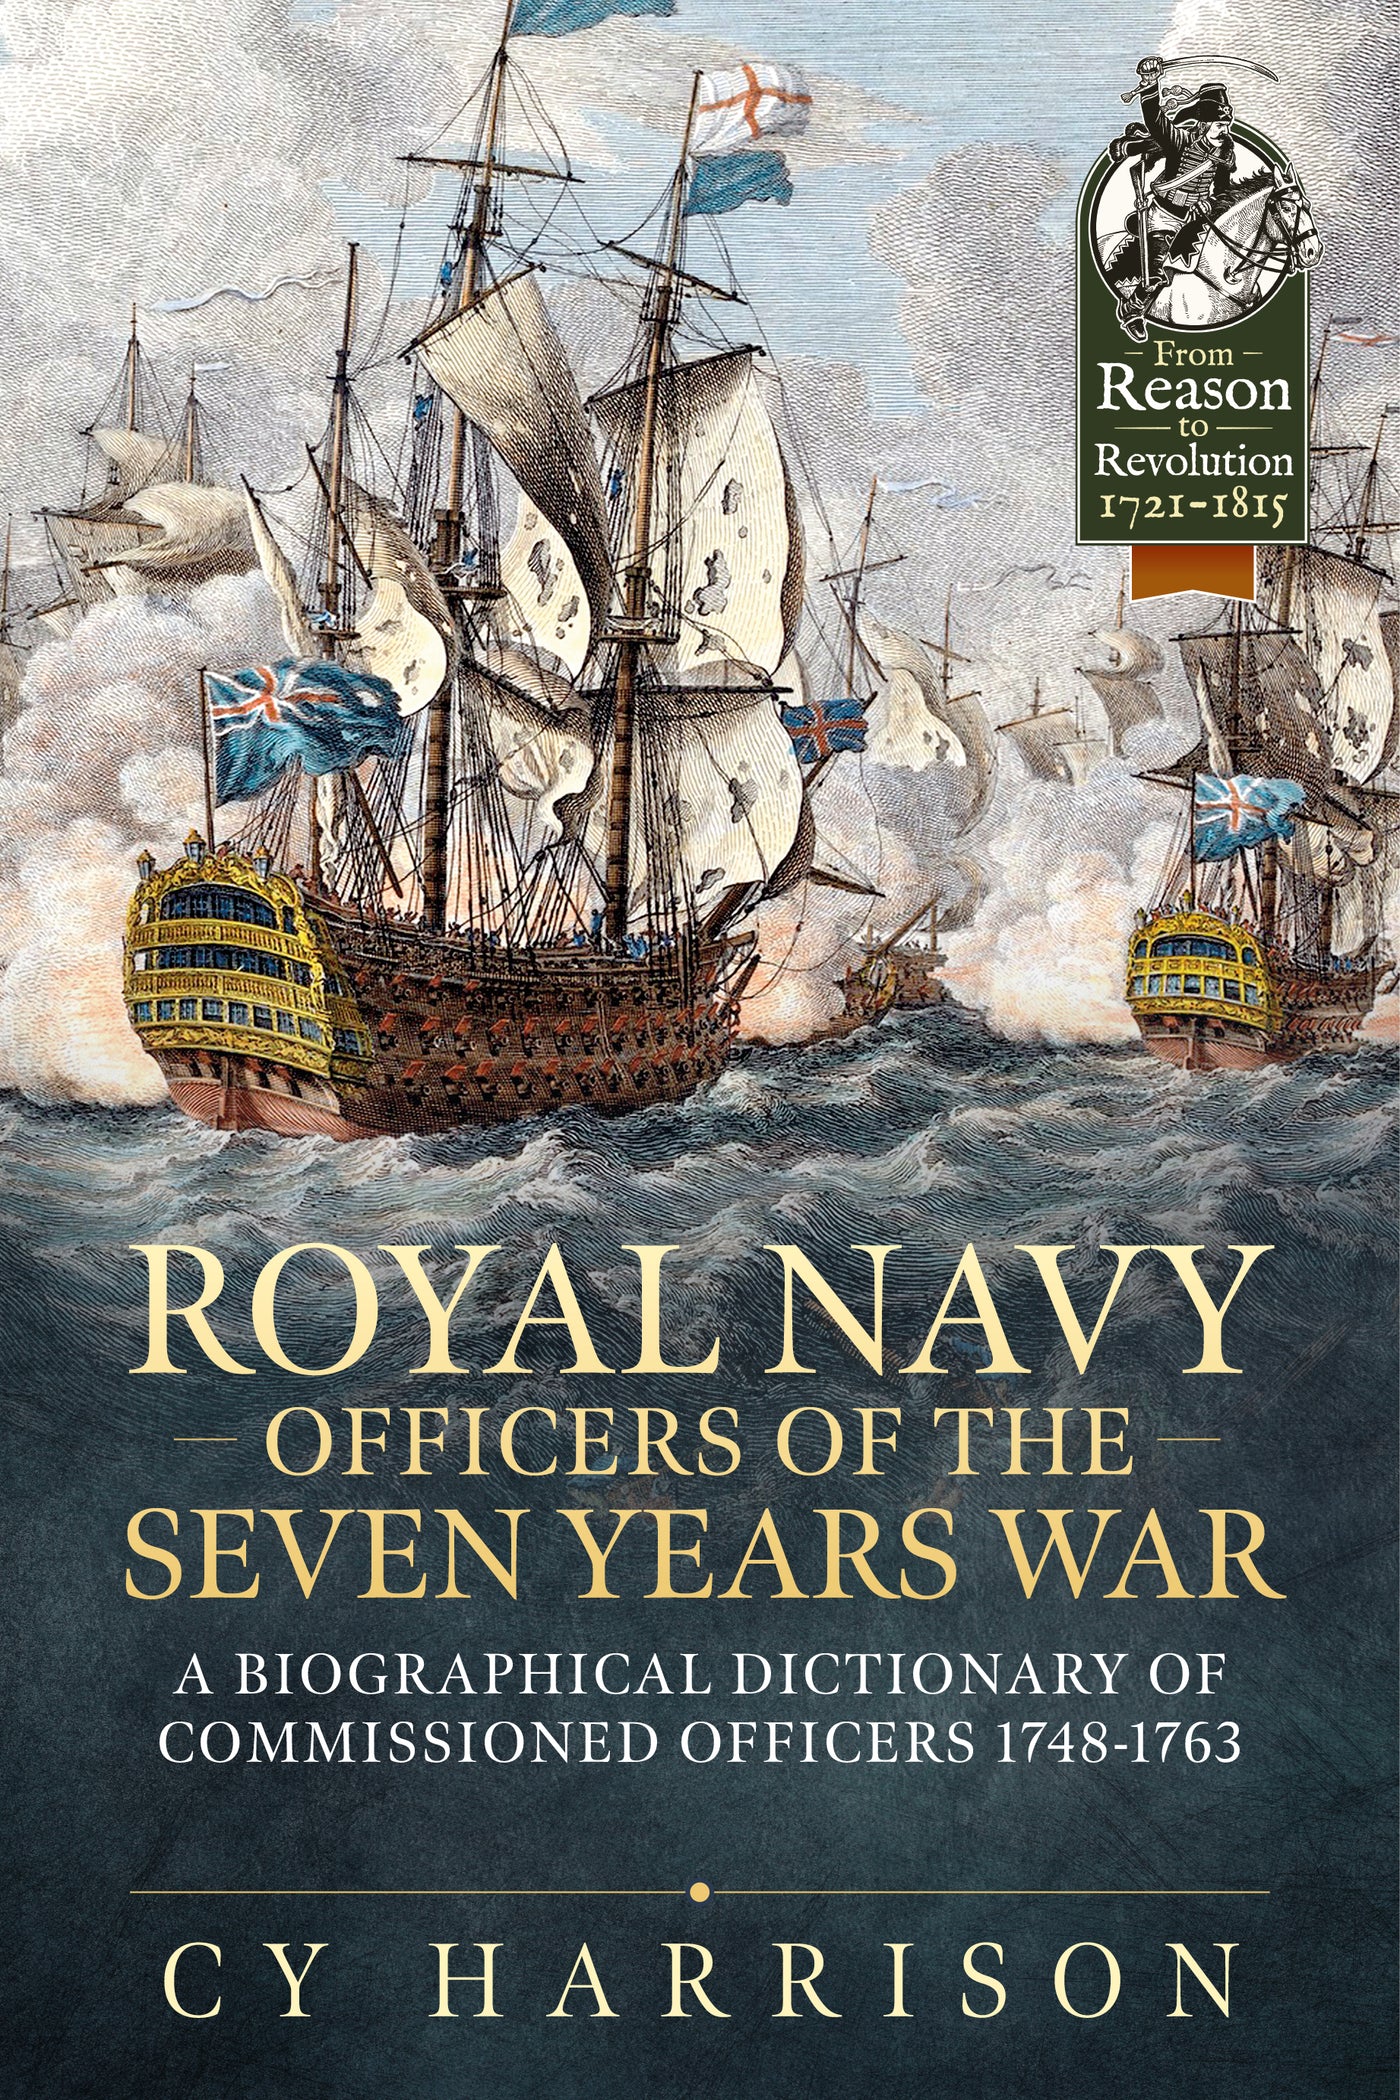 Royal Navy Officers of the Seven Years War